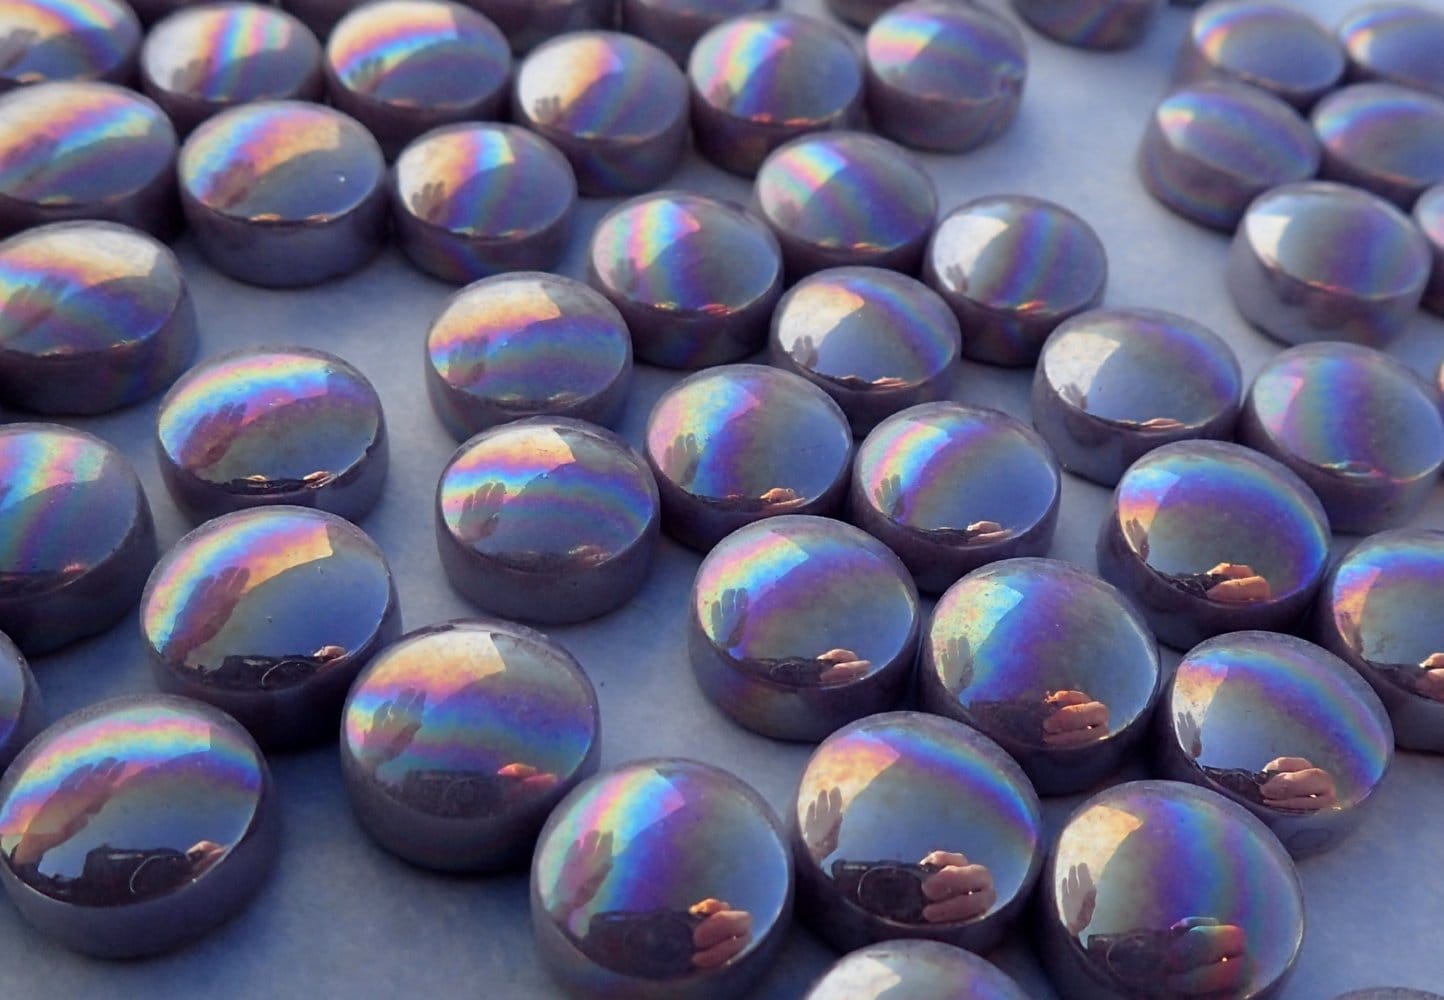 Lavender Iridescent Glass Drops Mosaic Tiles - 100 grams Pearl 12mm Glass Gems in Light Purple - Over 60 Tiles